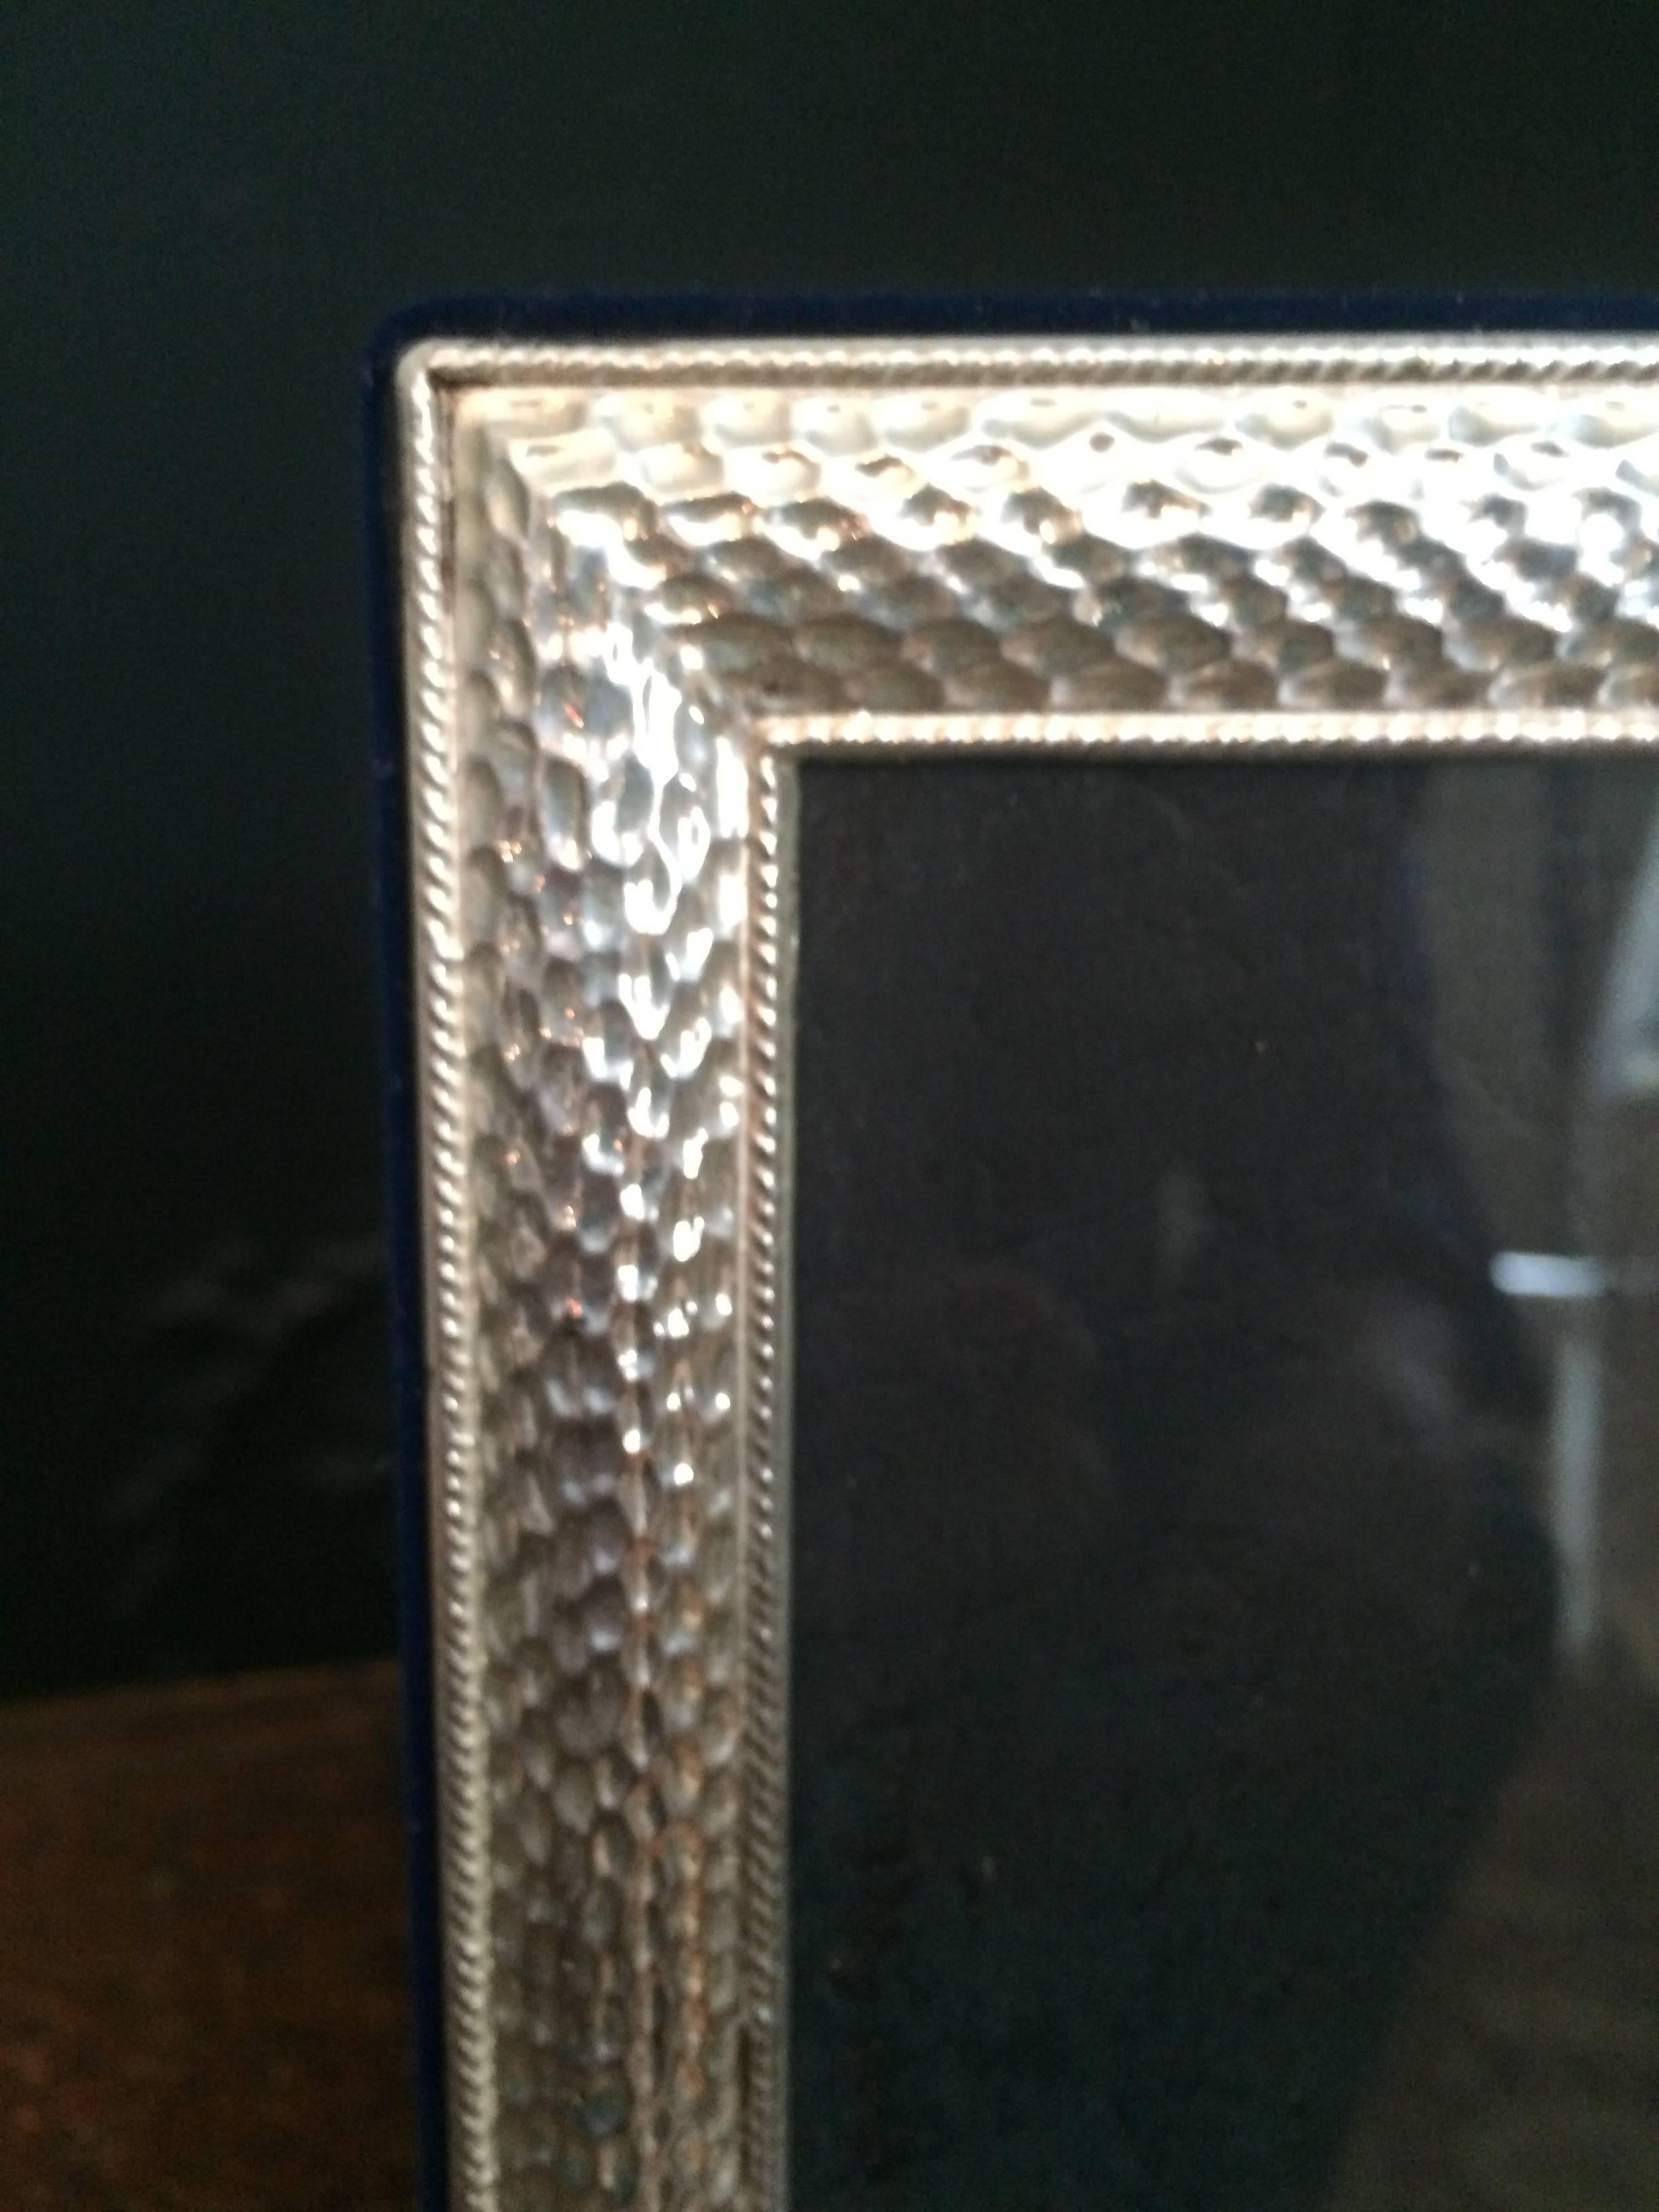 5 x 7 sterling frame with beautiful detailed edge. The side and rear are a royal blue velvet. Perfect to display that special someone.